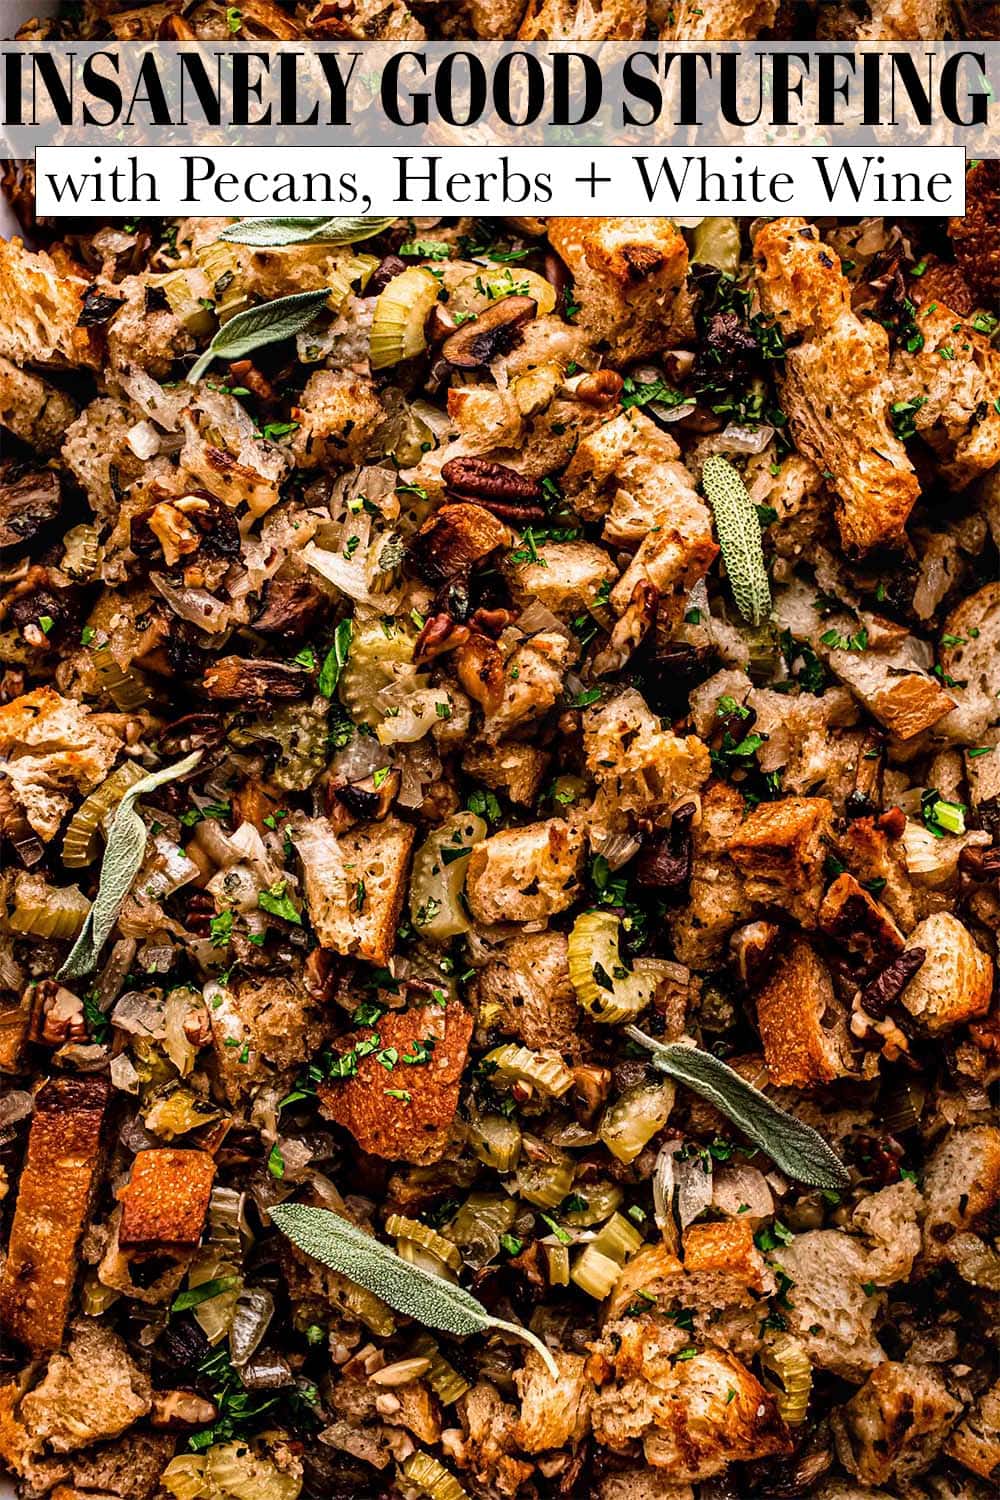 The BEST Mushroom Stuffing with Pecans & Herbs